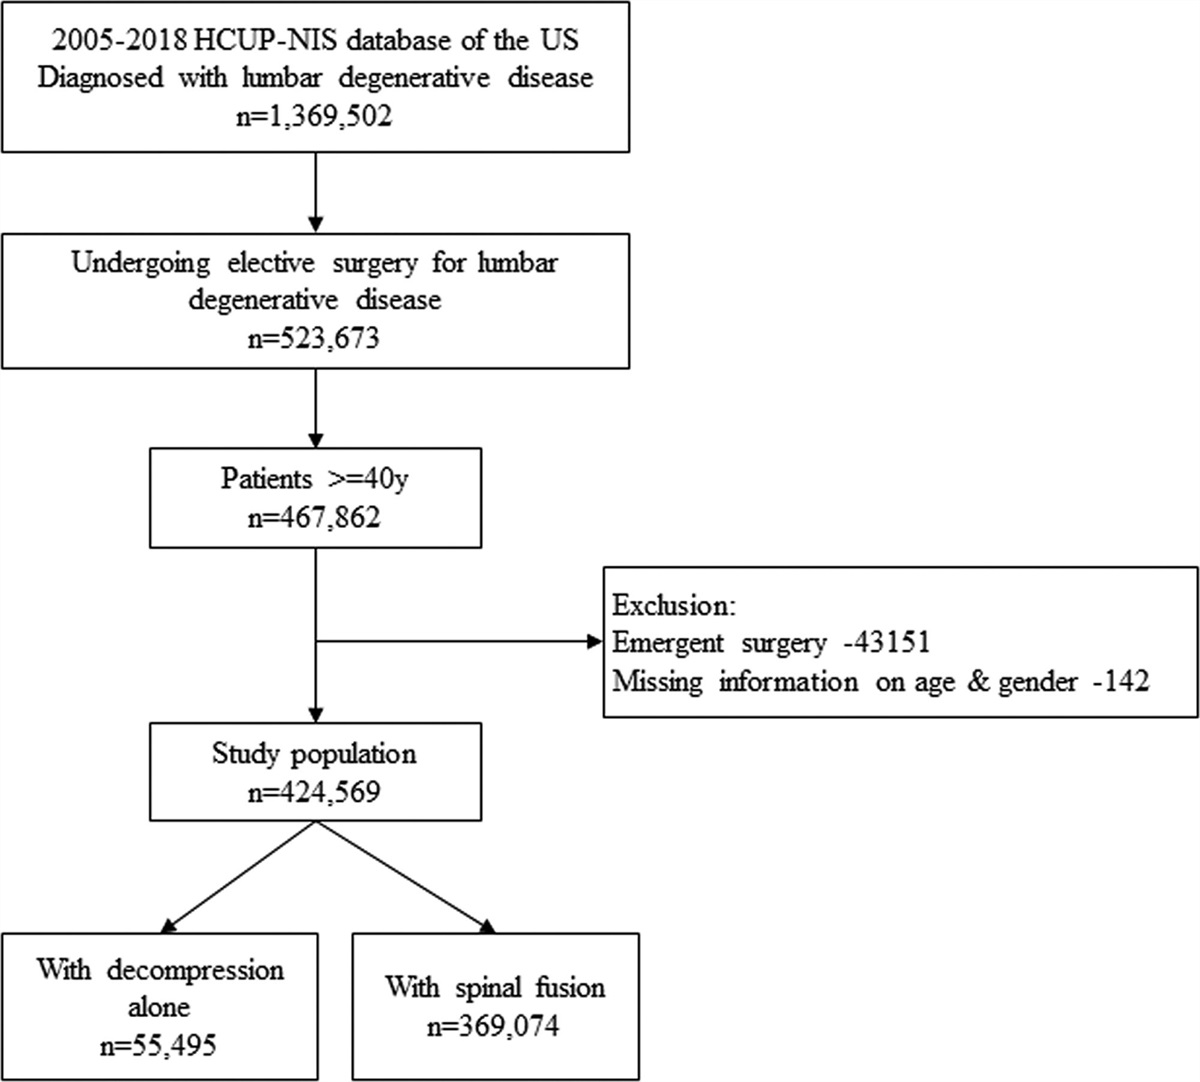 Incidence and predictors of acute kidney injury after elective surgery for lumbar degenerative disease: A 13-year analysis of the US Nationwide Inpatient Sample